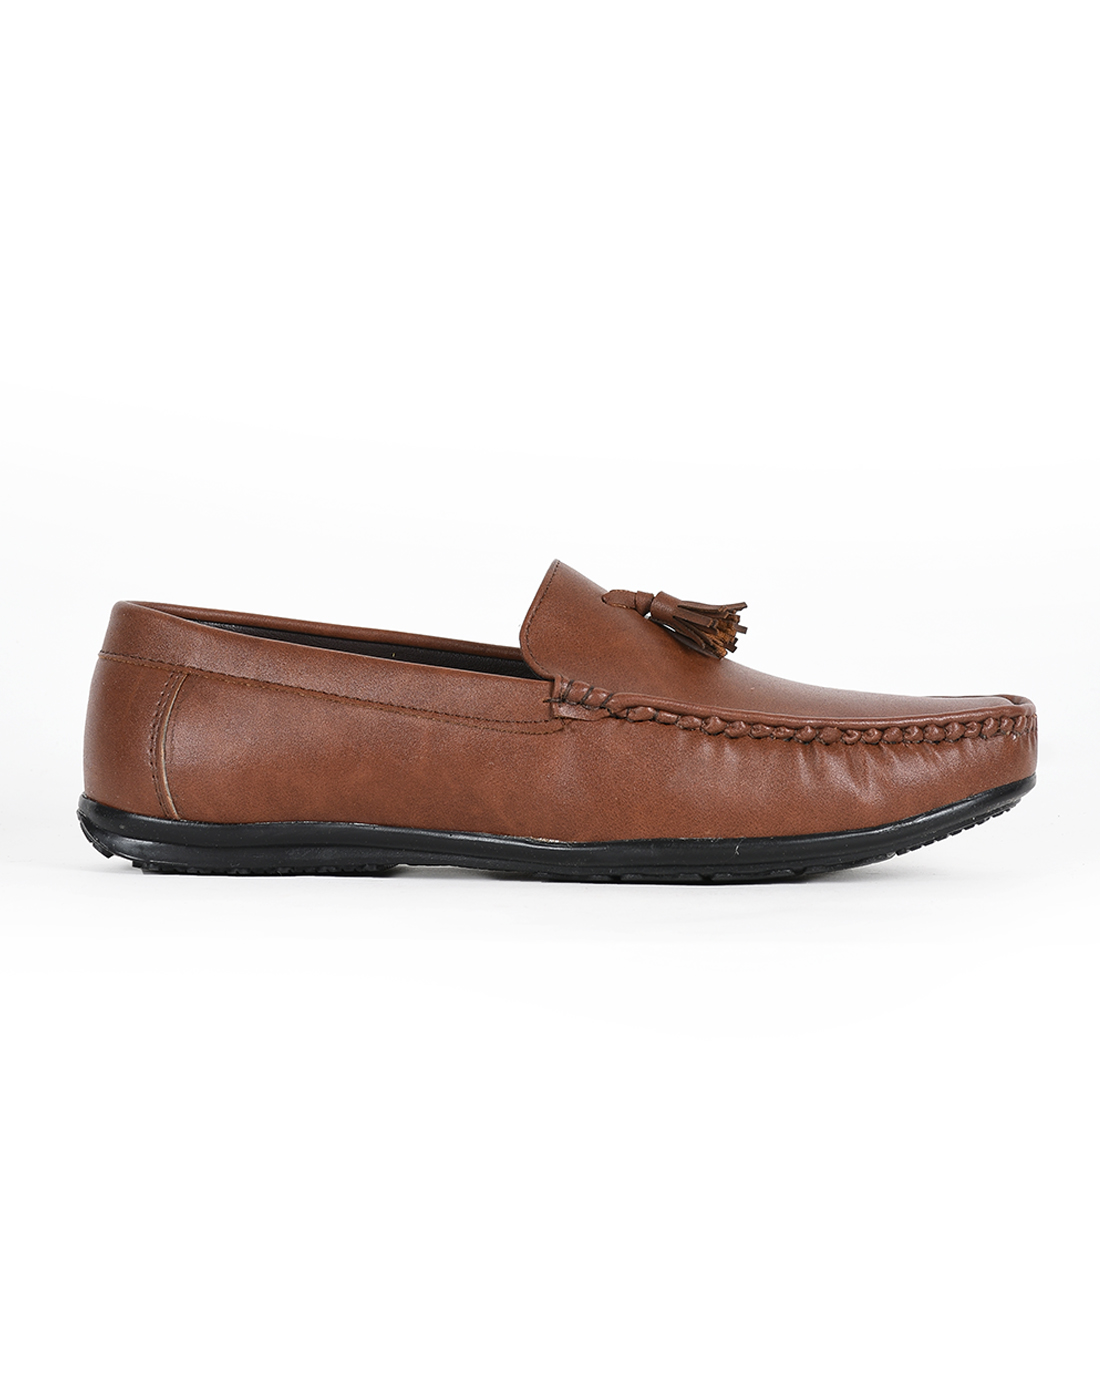 PARAGON Mens Solid Moccasins | Slip On Casual Wear Moccasin Shoes for Men